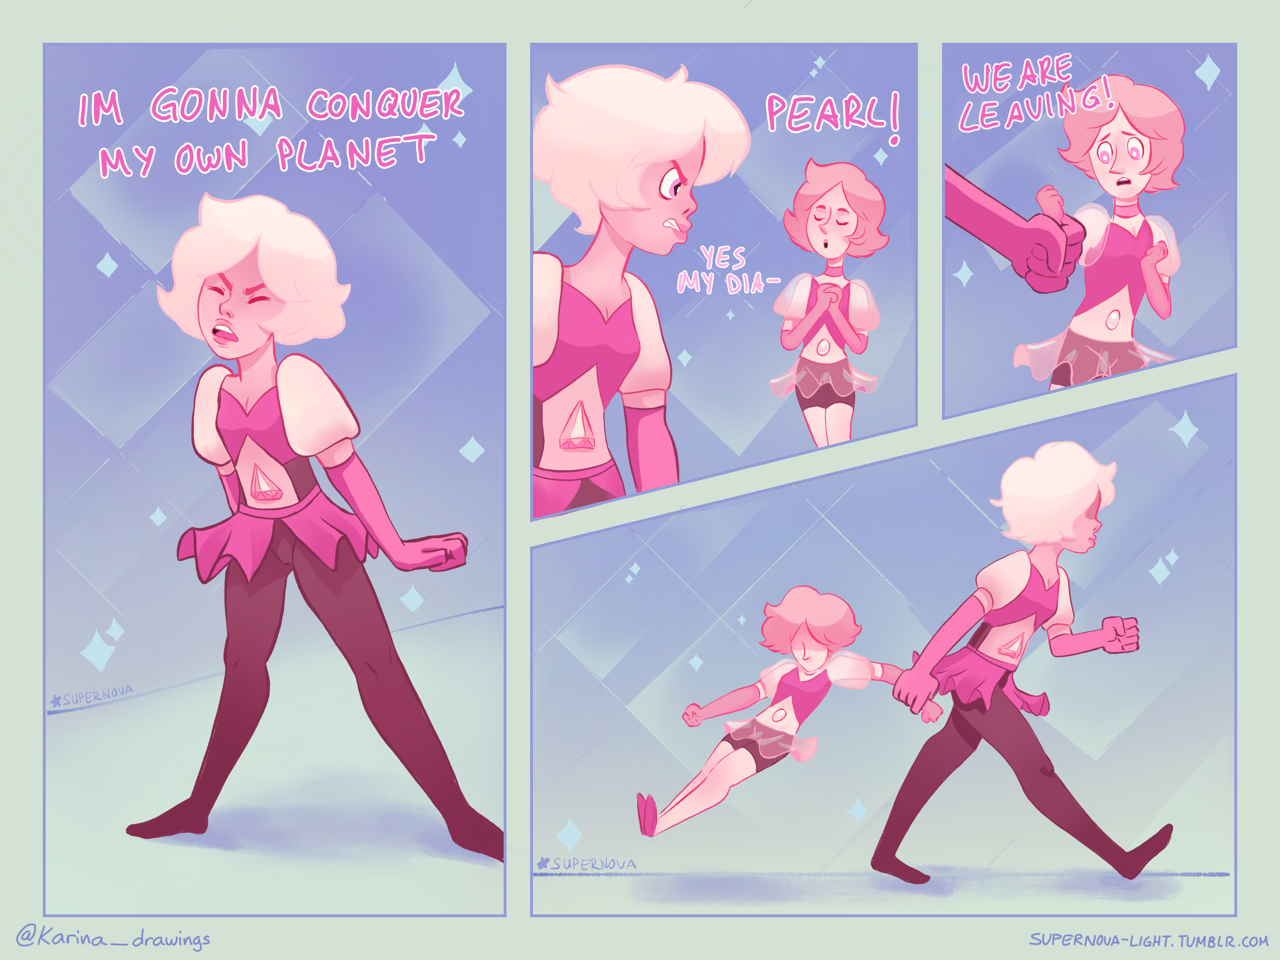 I have the feeling that Pink Diamond treats her Pearl even worse than Yellow D treats her